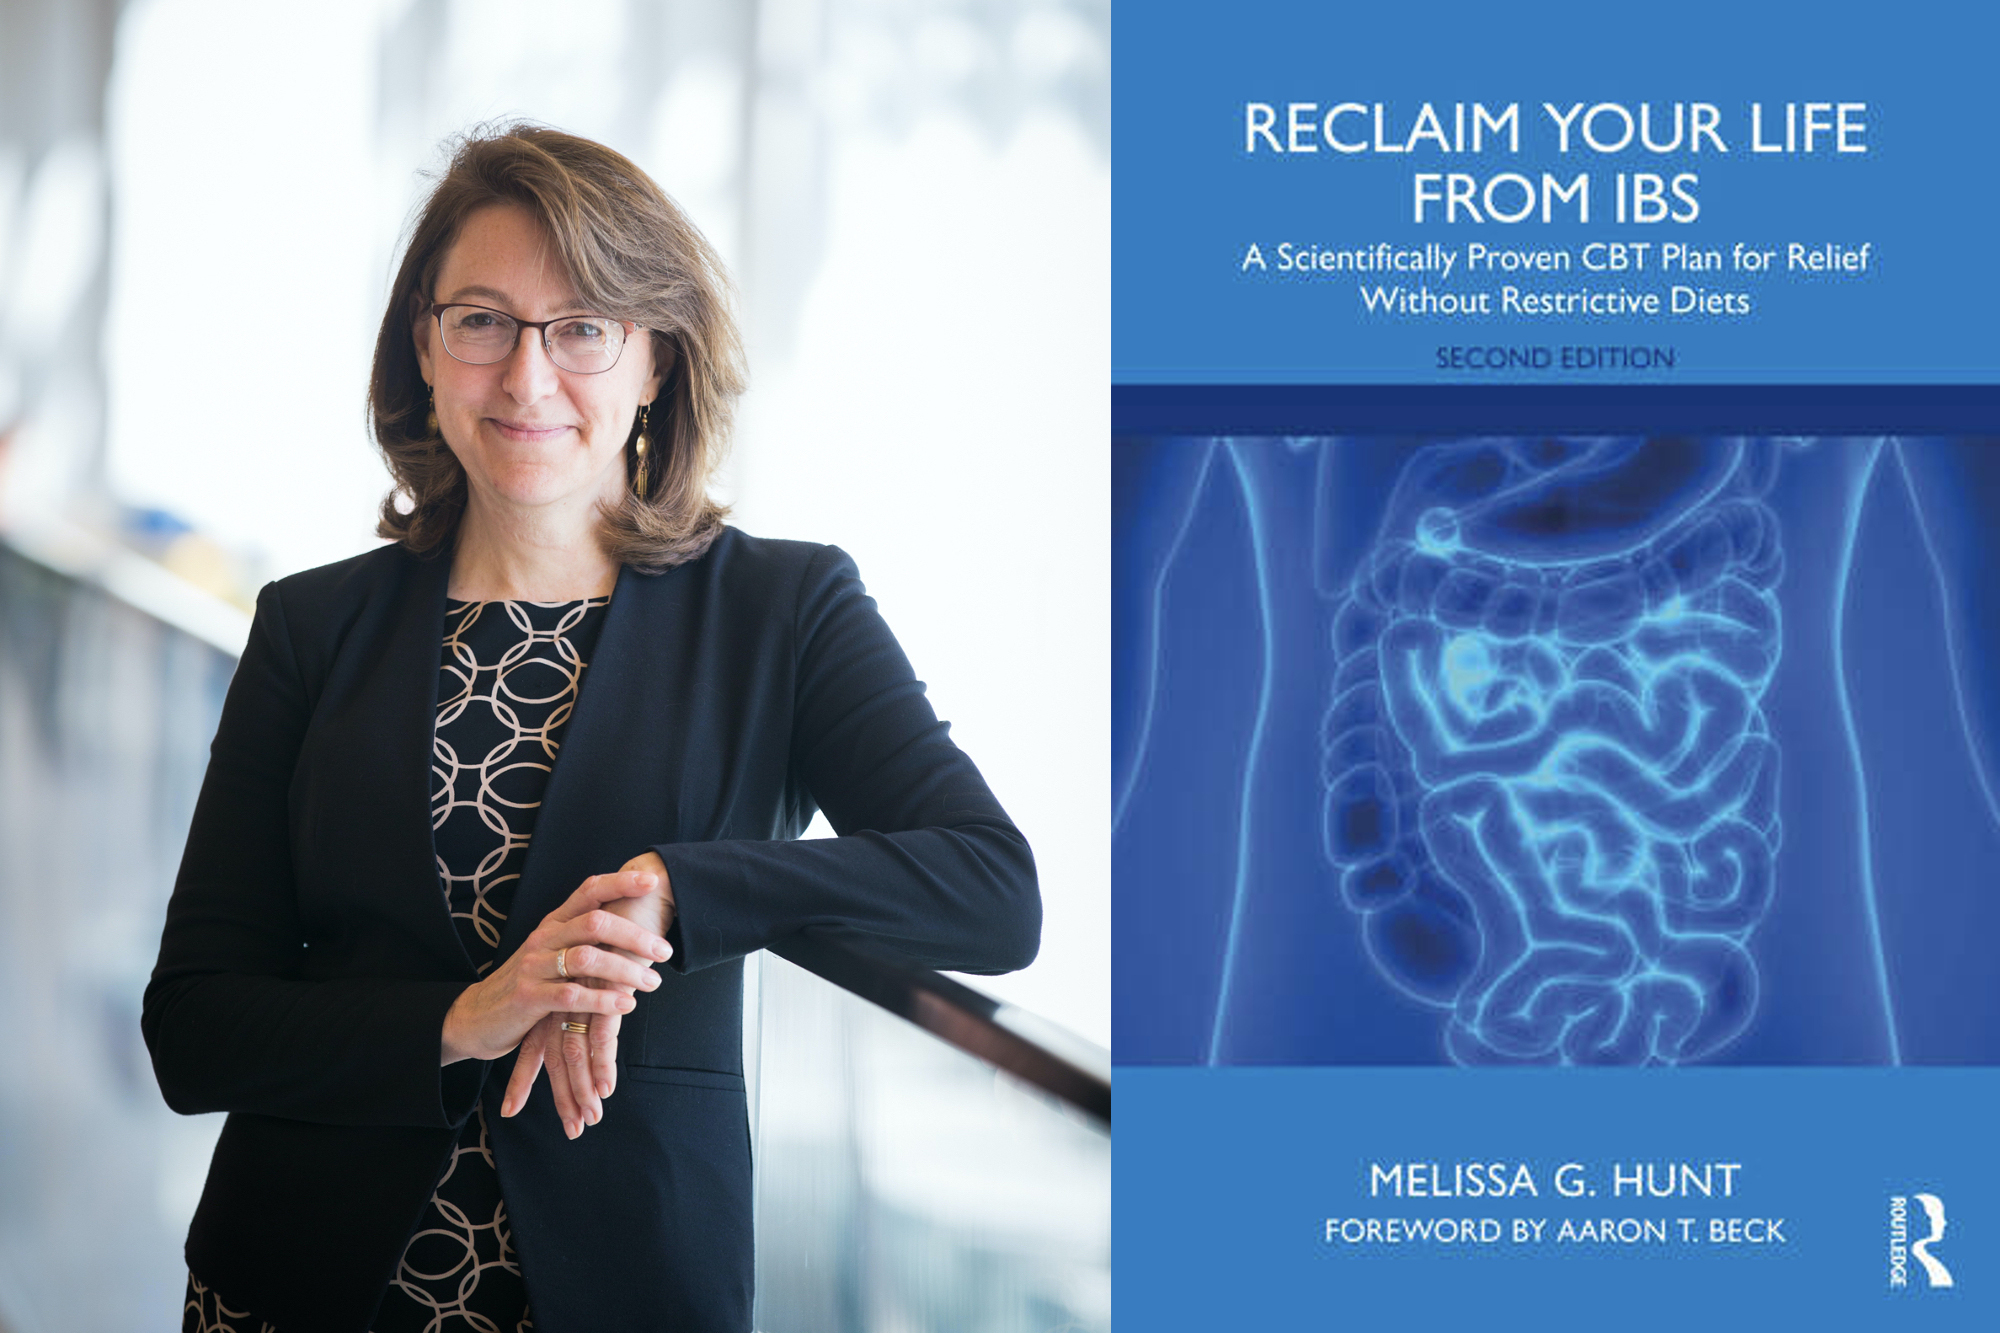 Left, Melissa Hunt. Right, book cover for “Reclaim Your Life From IBS.”